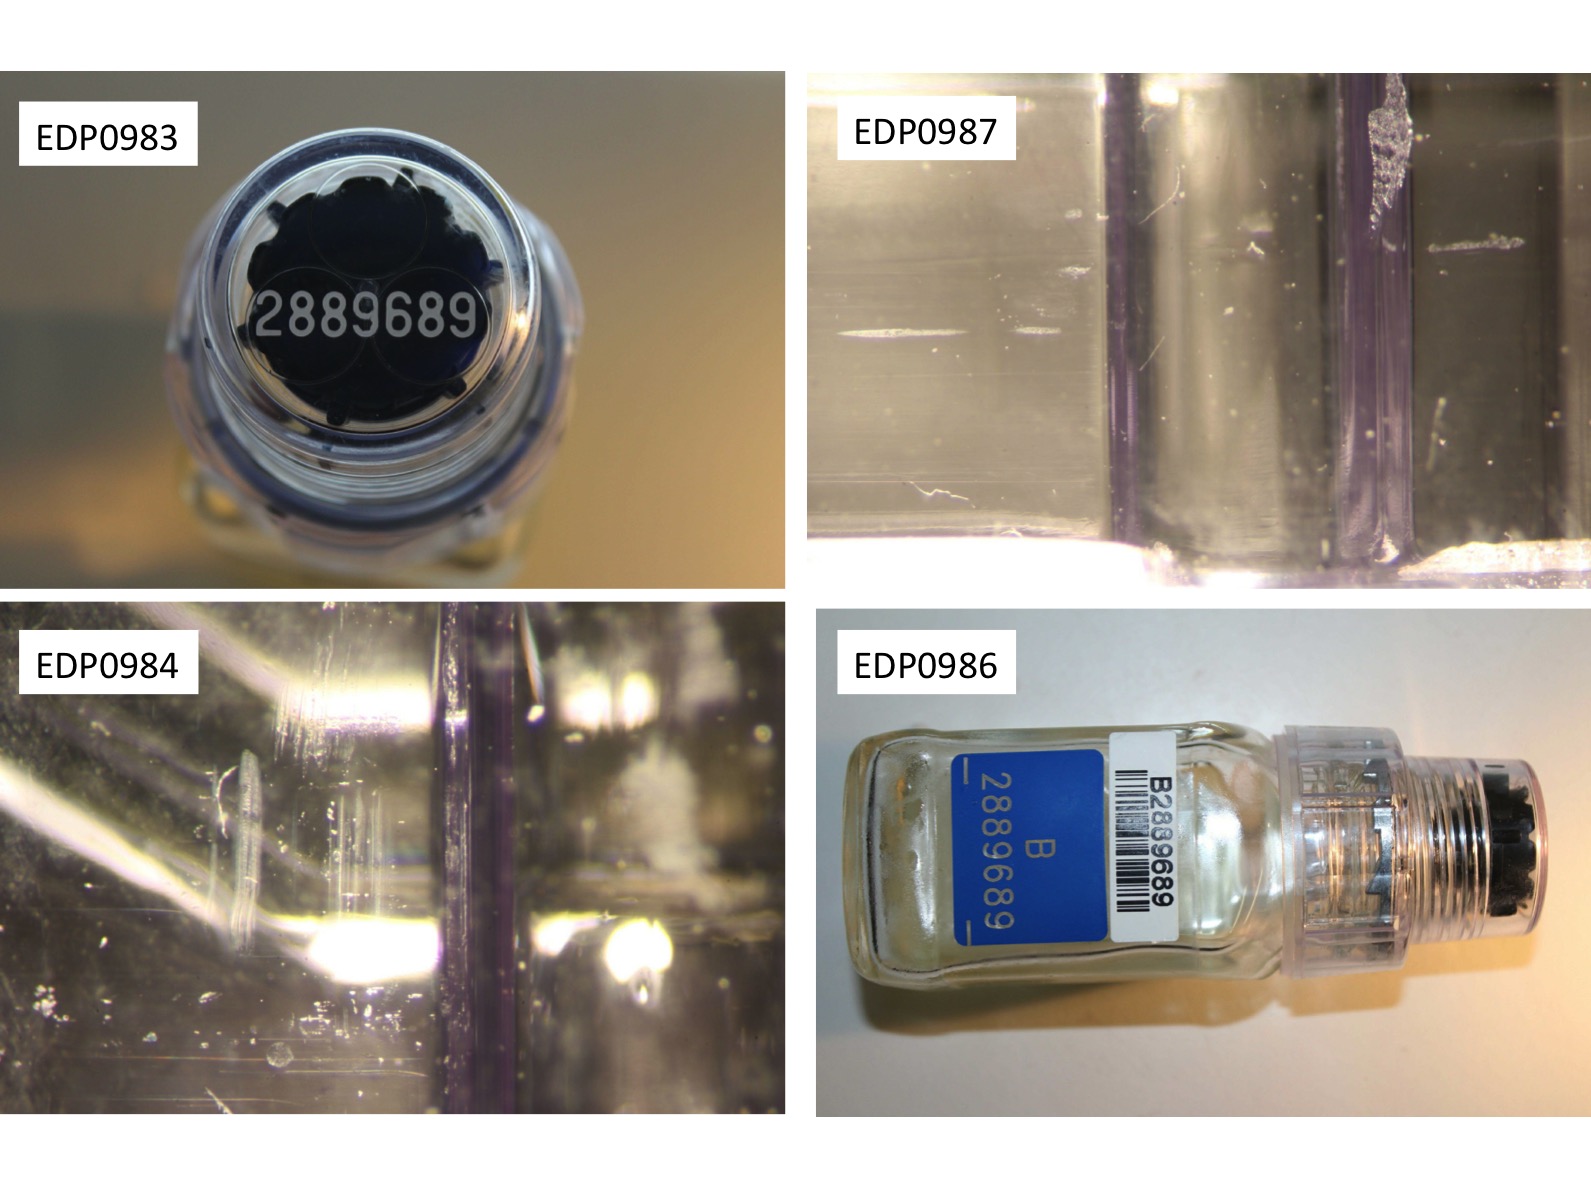 Photos of the sample bottle from the McLaren report's evidence packet.